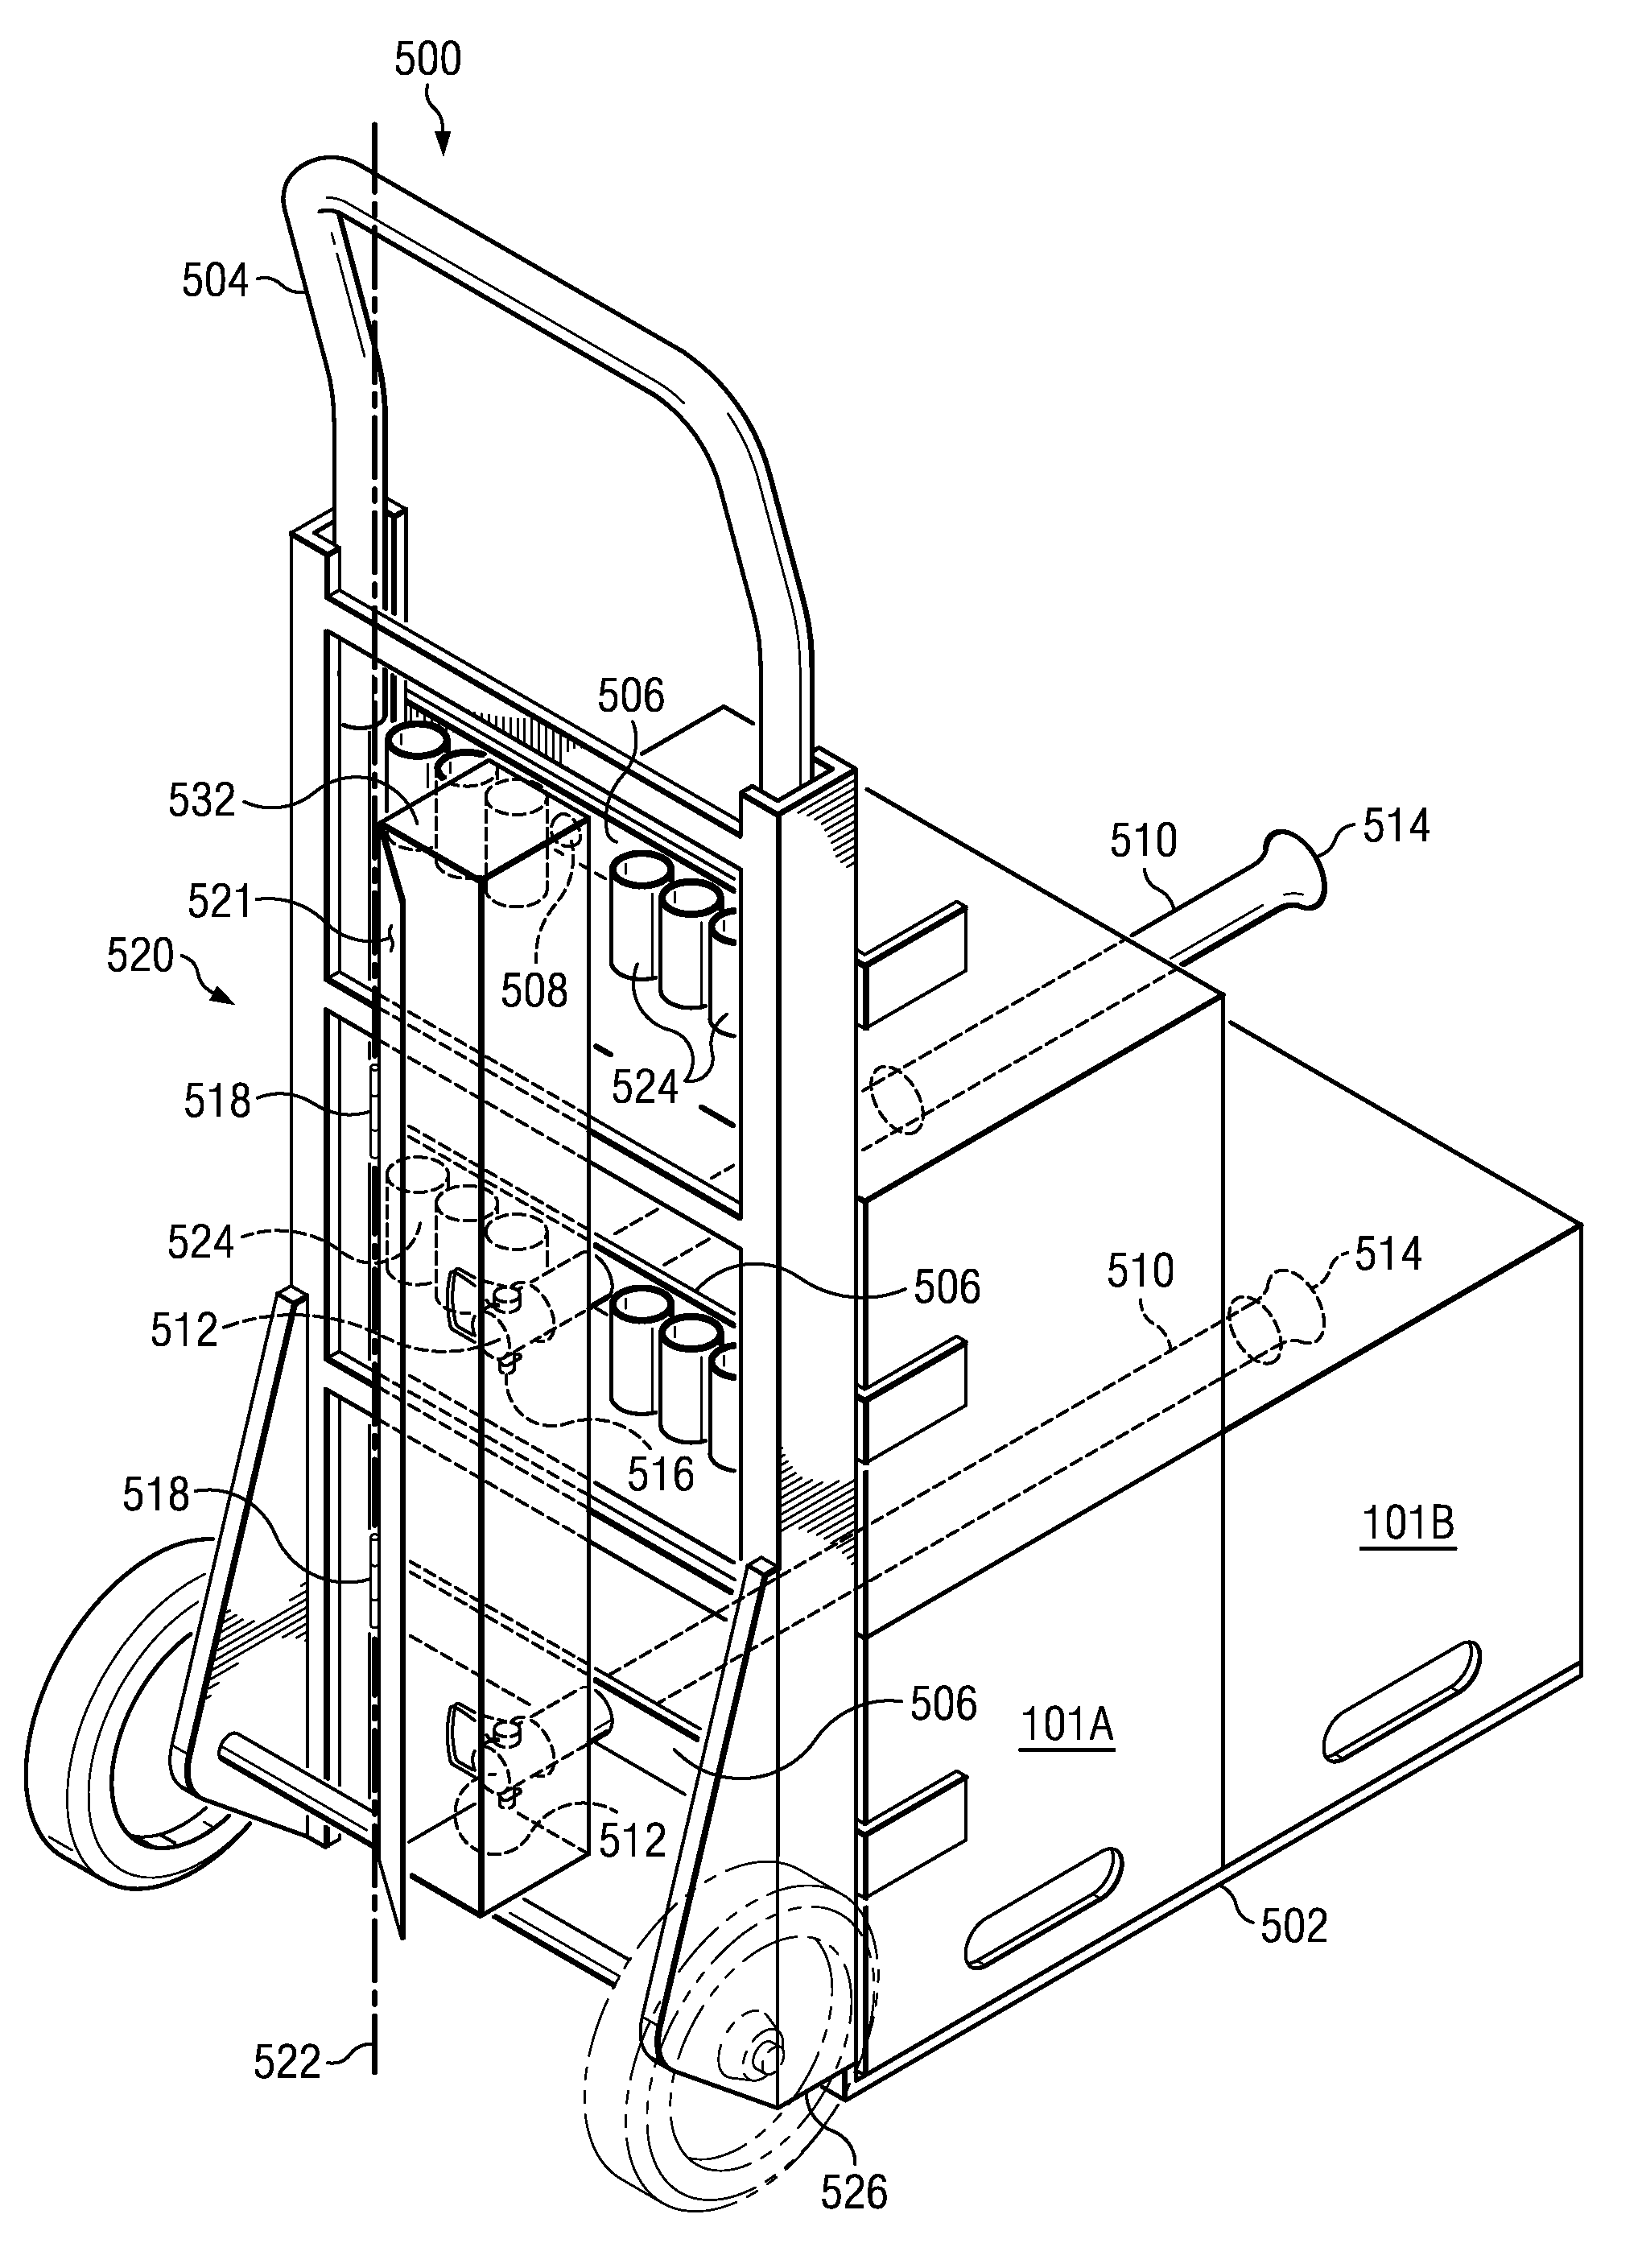 Locker and security enclosure for cable-pulling cart